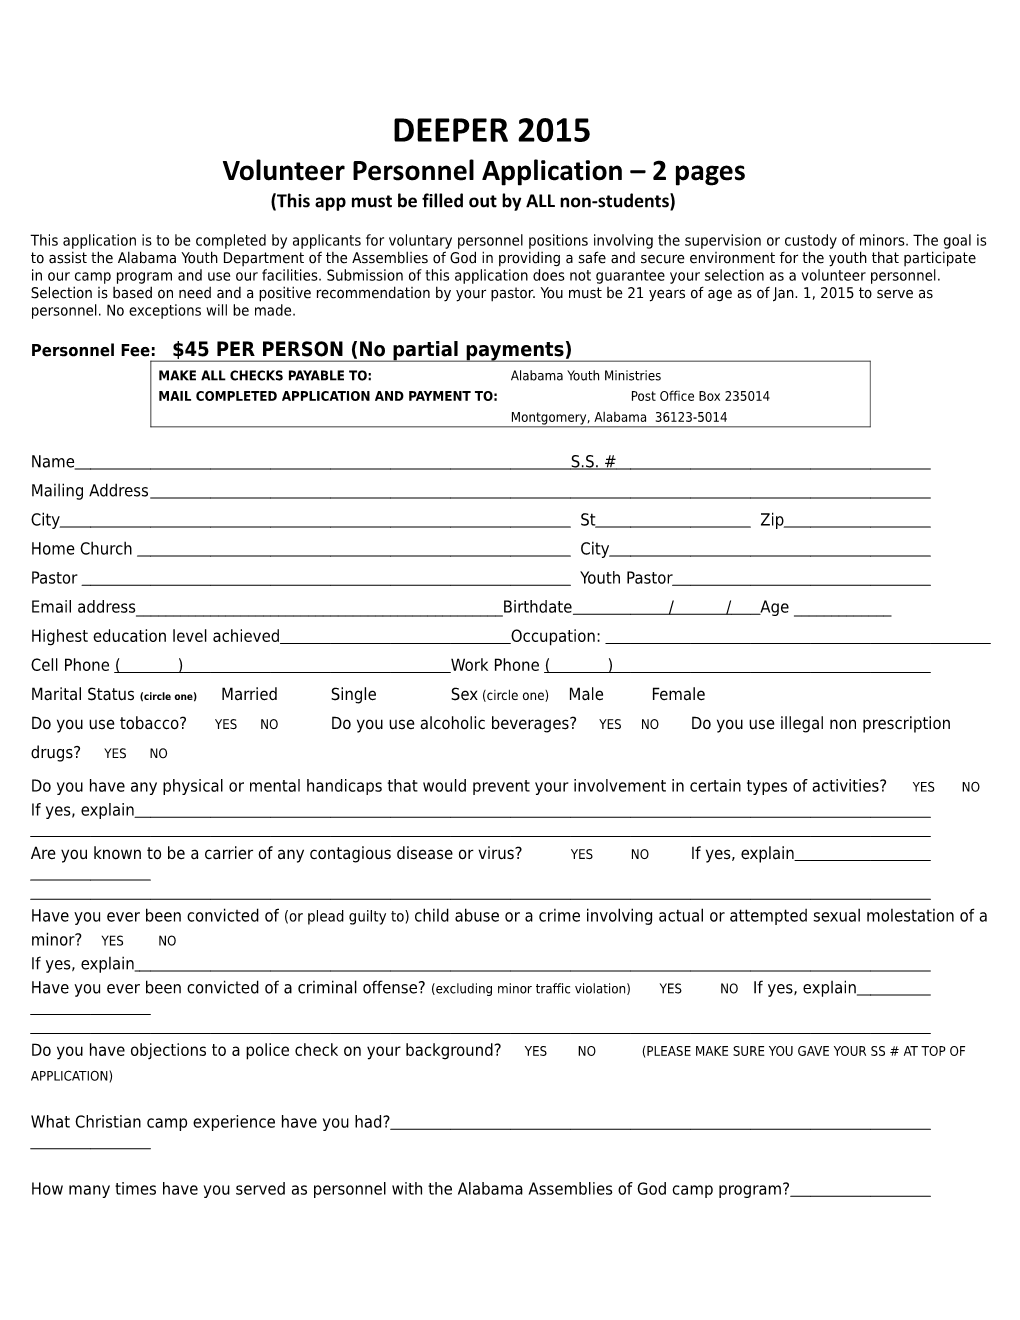 Volunteer Personnel Application 2 Pages